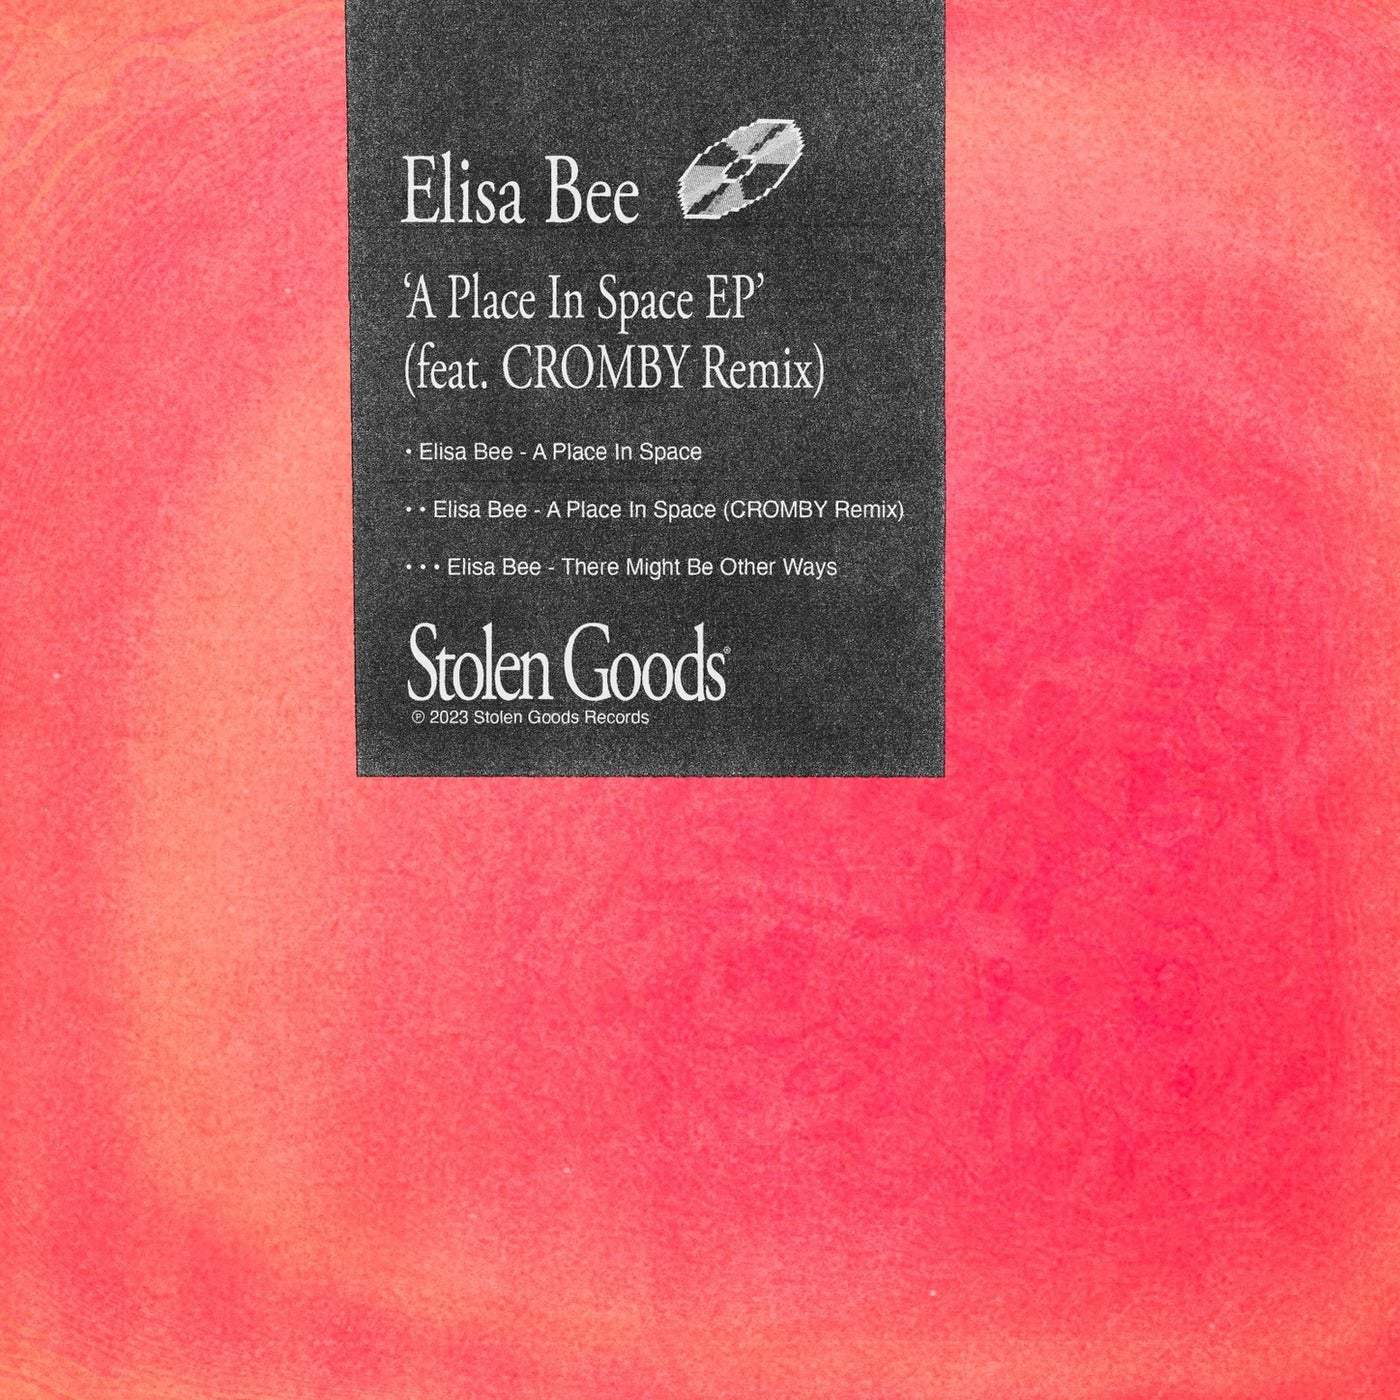 image cover: Elisa Bee - A Place in Space EP / SGR004